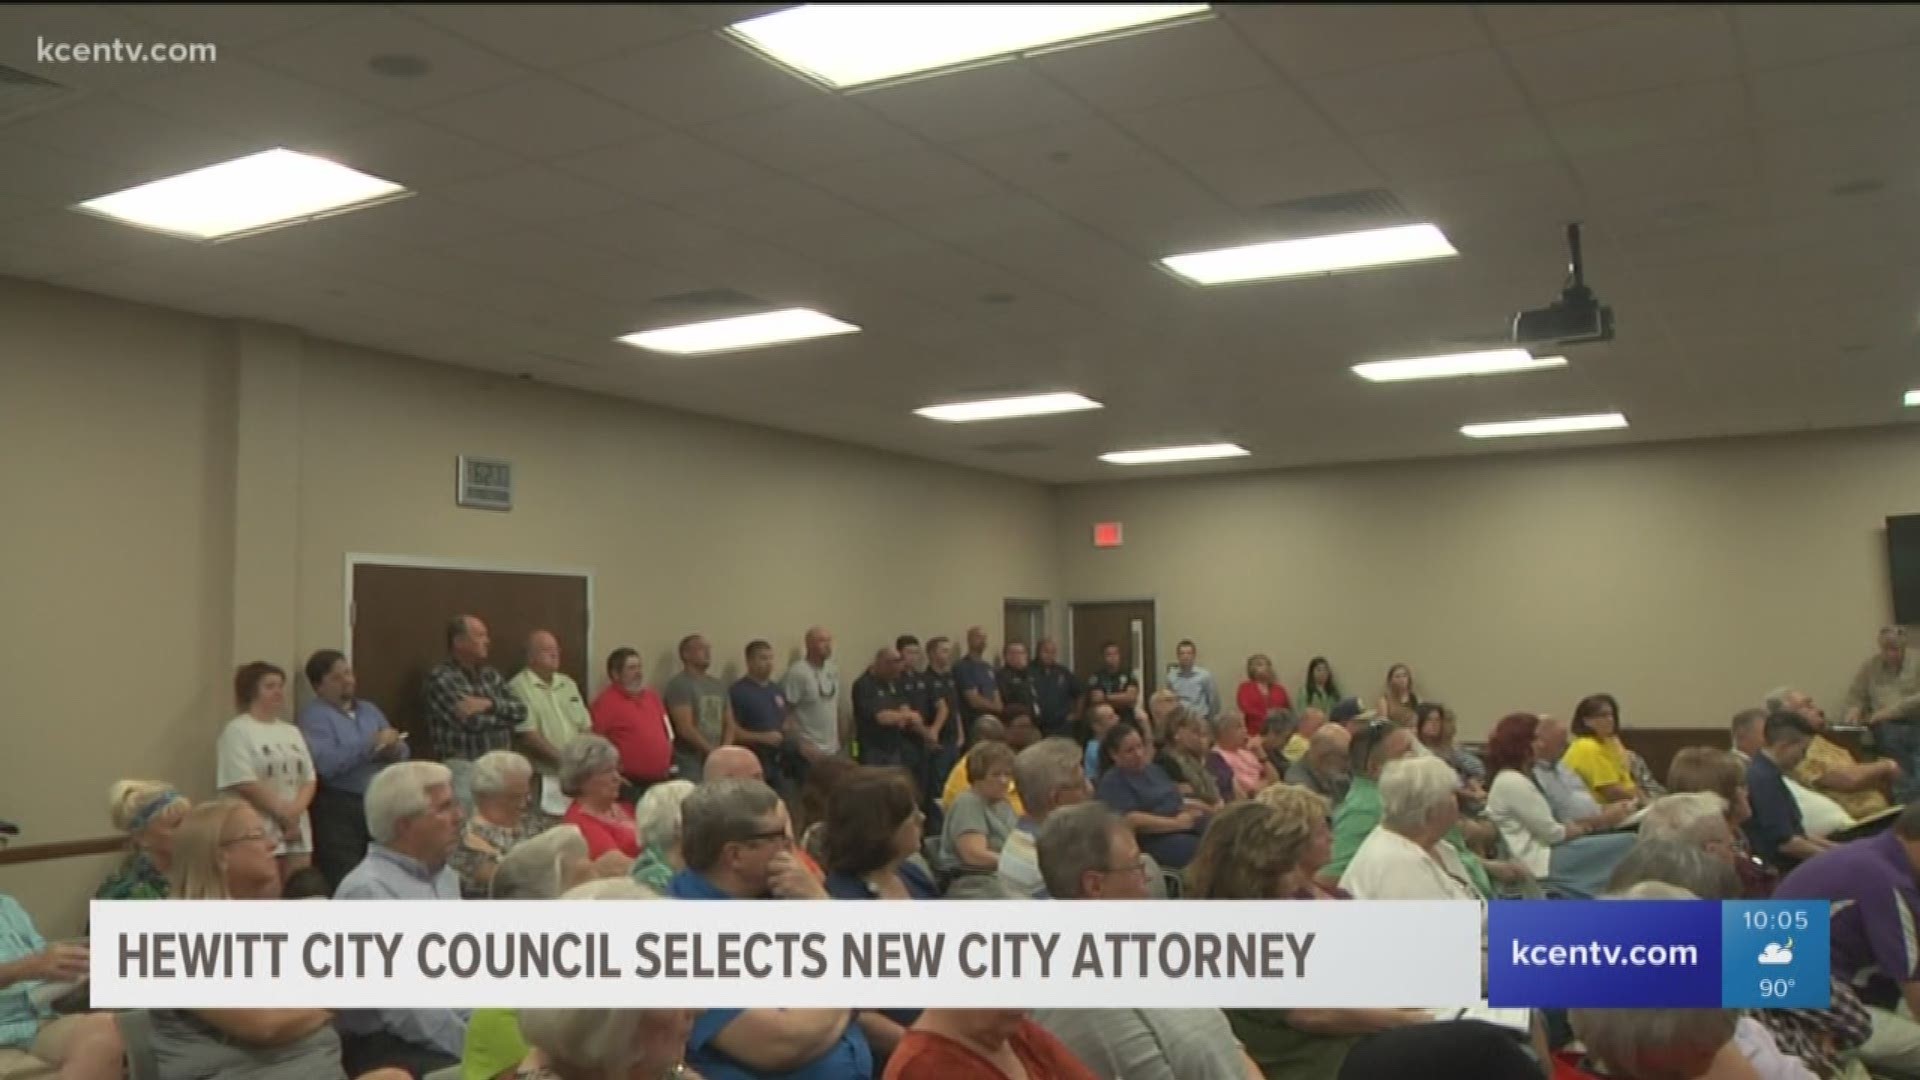 Michael Dixon will be the new City attorney after the City Council's unanimous vote. 